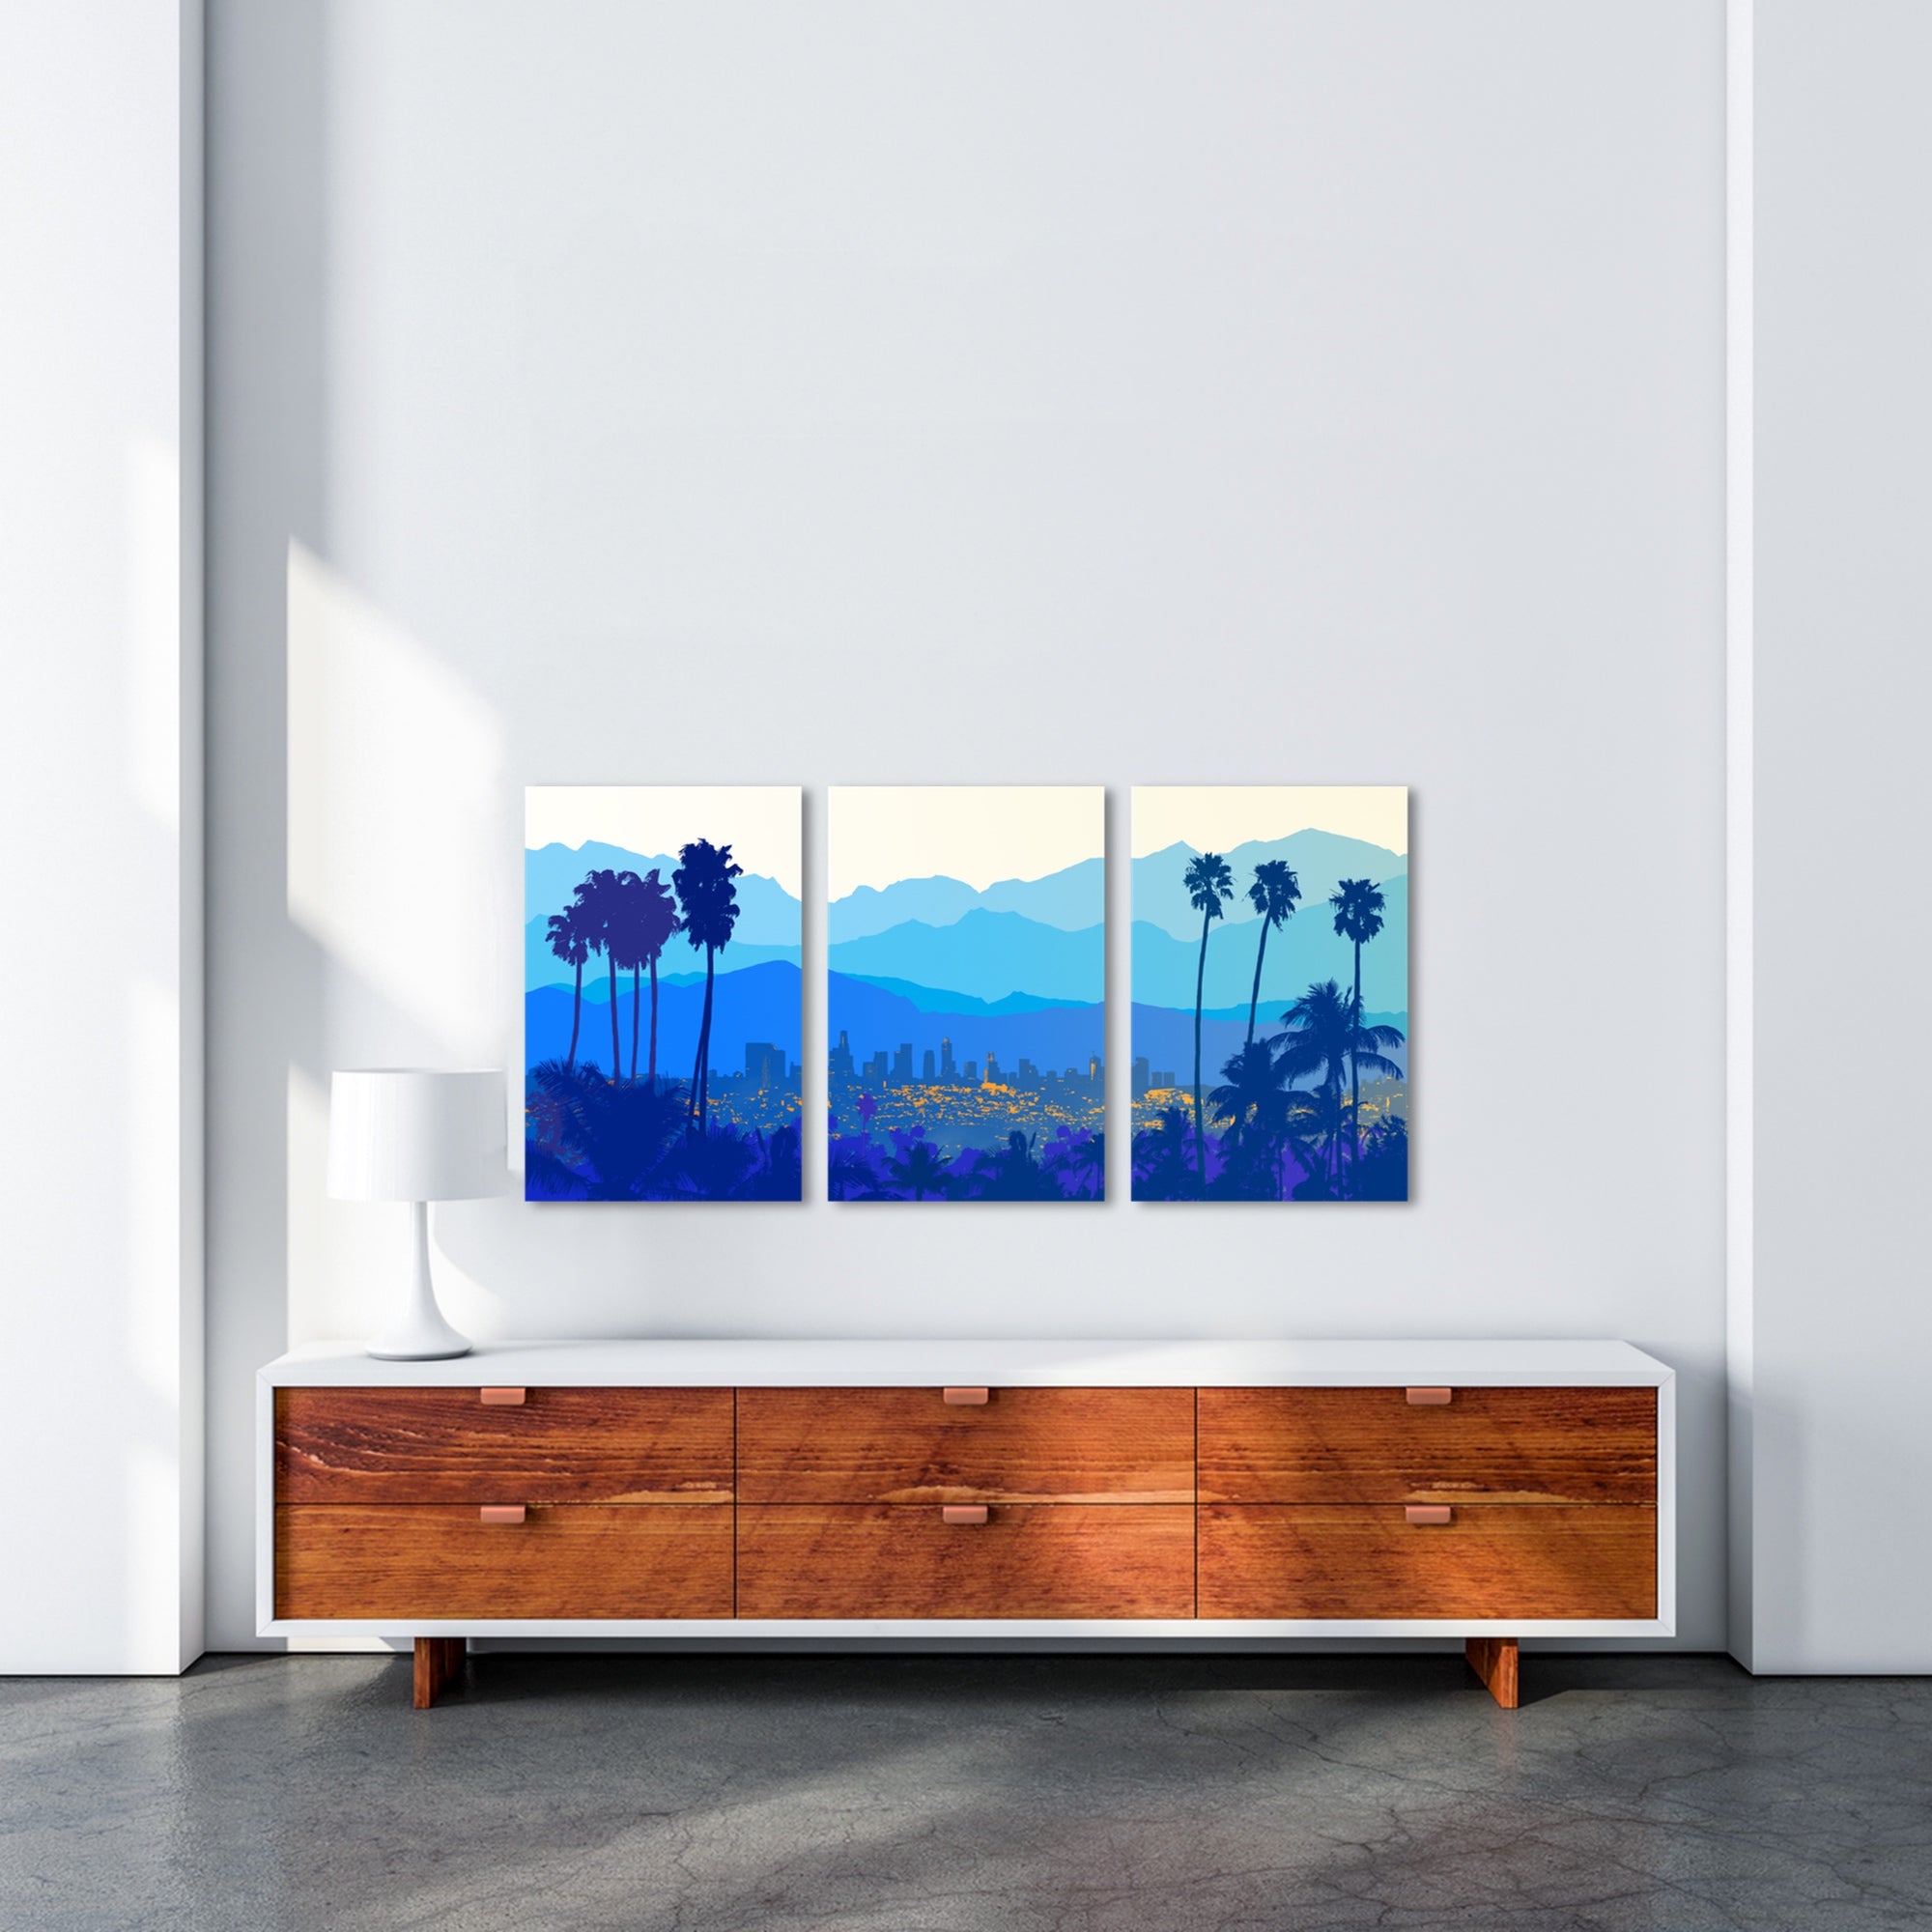 Los Angeles Staples Center City Skyline Prints Painting Canvas Large Canvas  Art Rise Of Buildings Downtown Decor Wall On Canvas Print